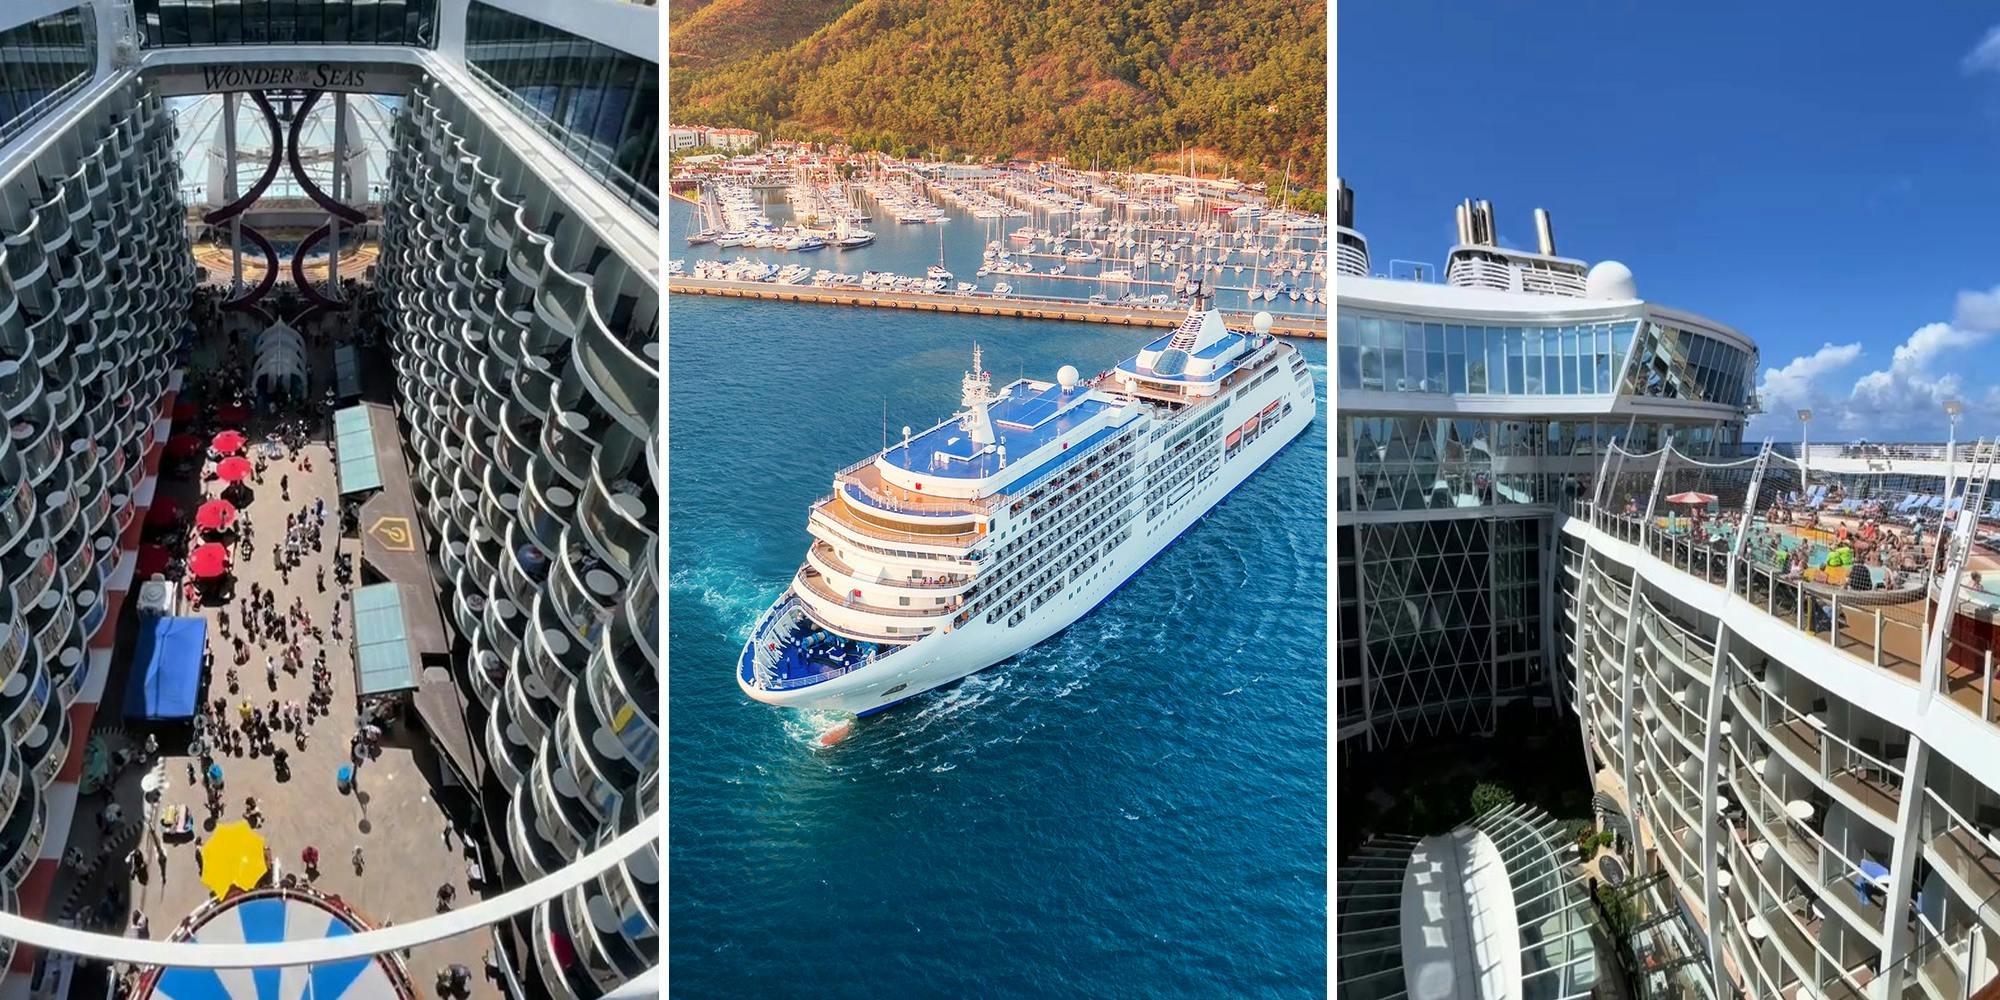 ‘The pros have a system’: Expert reveals 5 ways cruise passengers are wasting money